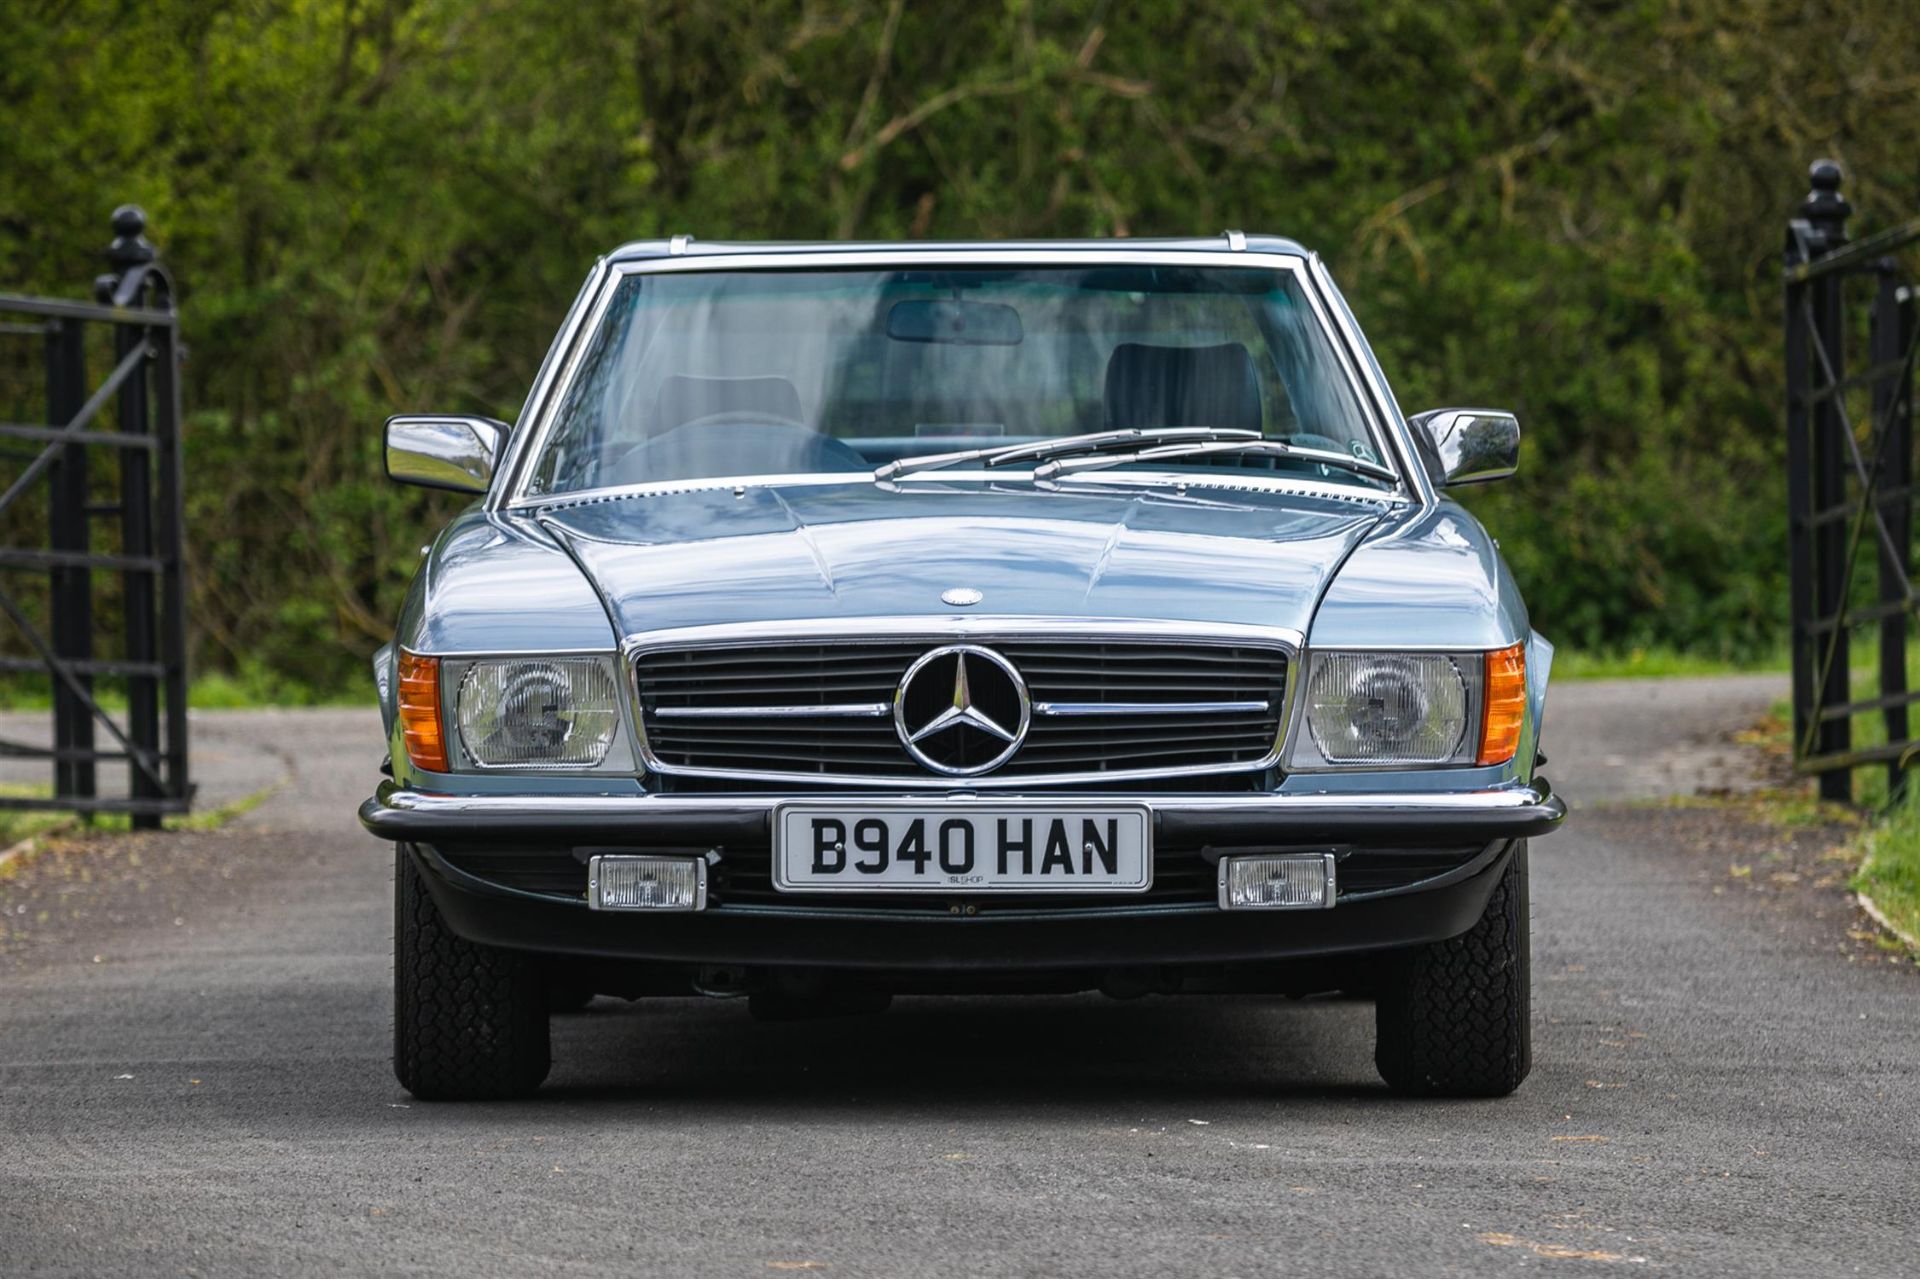 1985 Mercedes Benz 280SL (R107) with hardtop - 28,700 Miles - Image 6 of 10